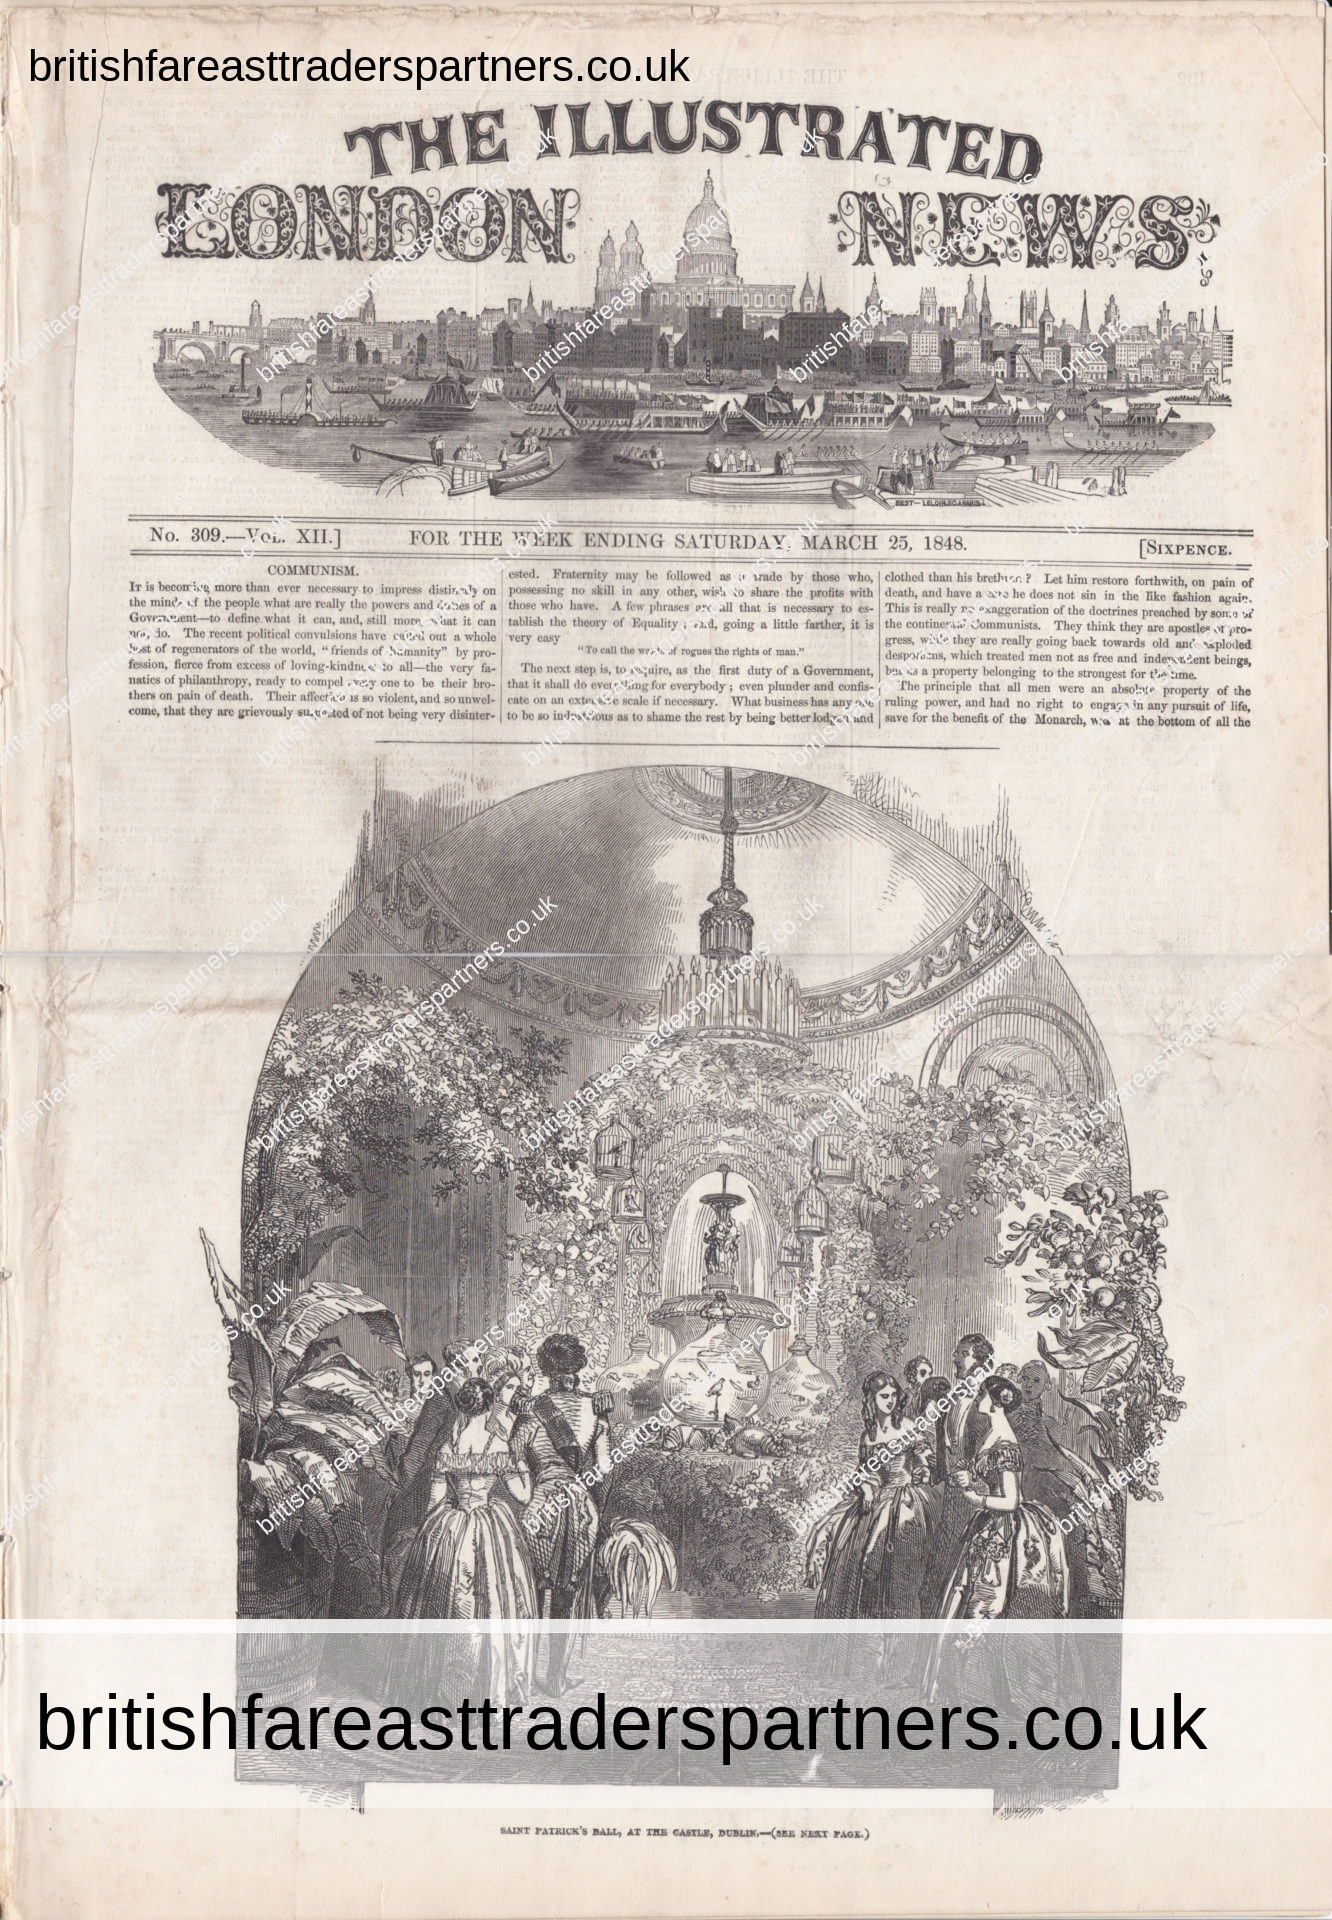 ANTIQUE 1848 FULL NEWSPAPER “THE ILLUSTRATED LONDON NEWS” FO THE WEEK ENDING SATURDAY: MARCH 25, 1848 ANTIQUARIAN & COLLECTABLES PAPER & EPHEMERA |  SOCIETY | LEISURE | LIFESTYLE | VINTAGE FASHION & BEAUTY | BRITISH | UNITED KINGDOM